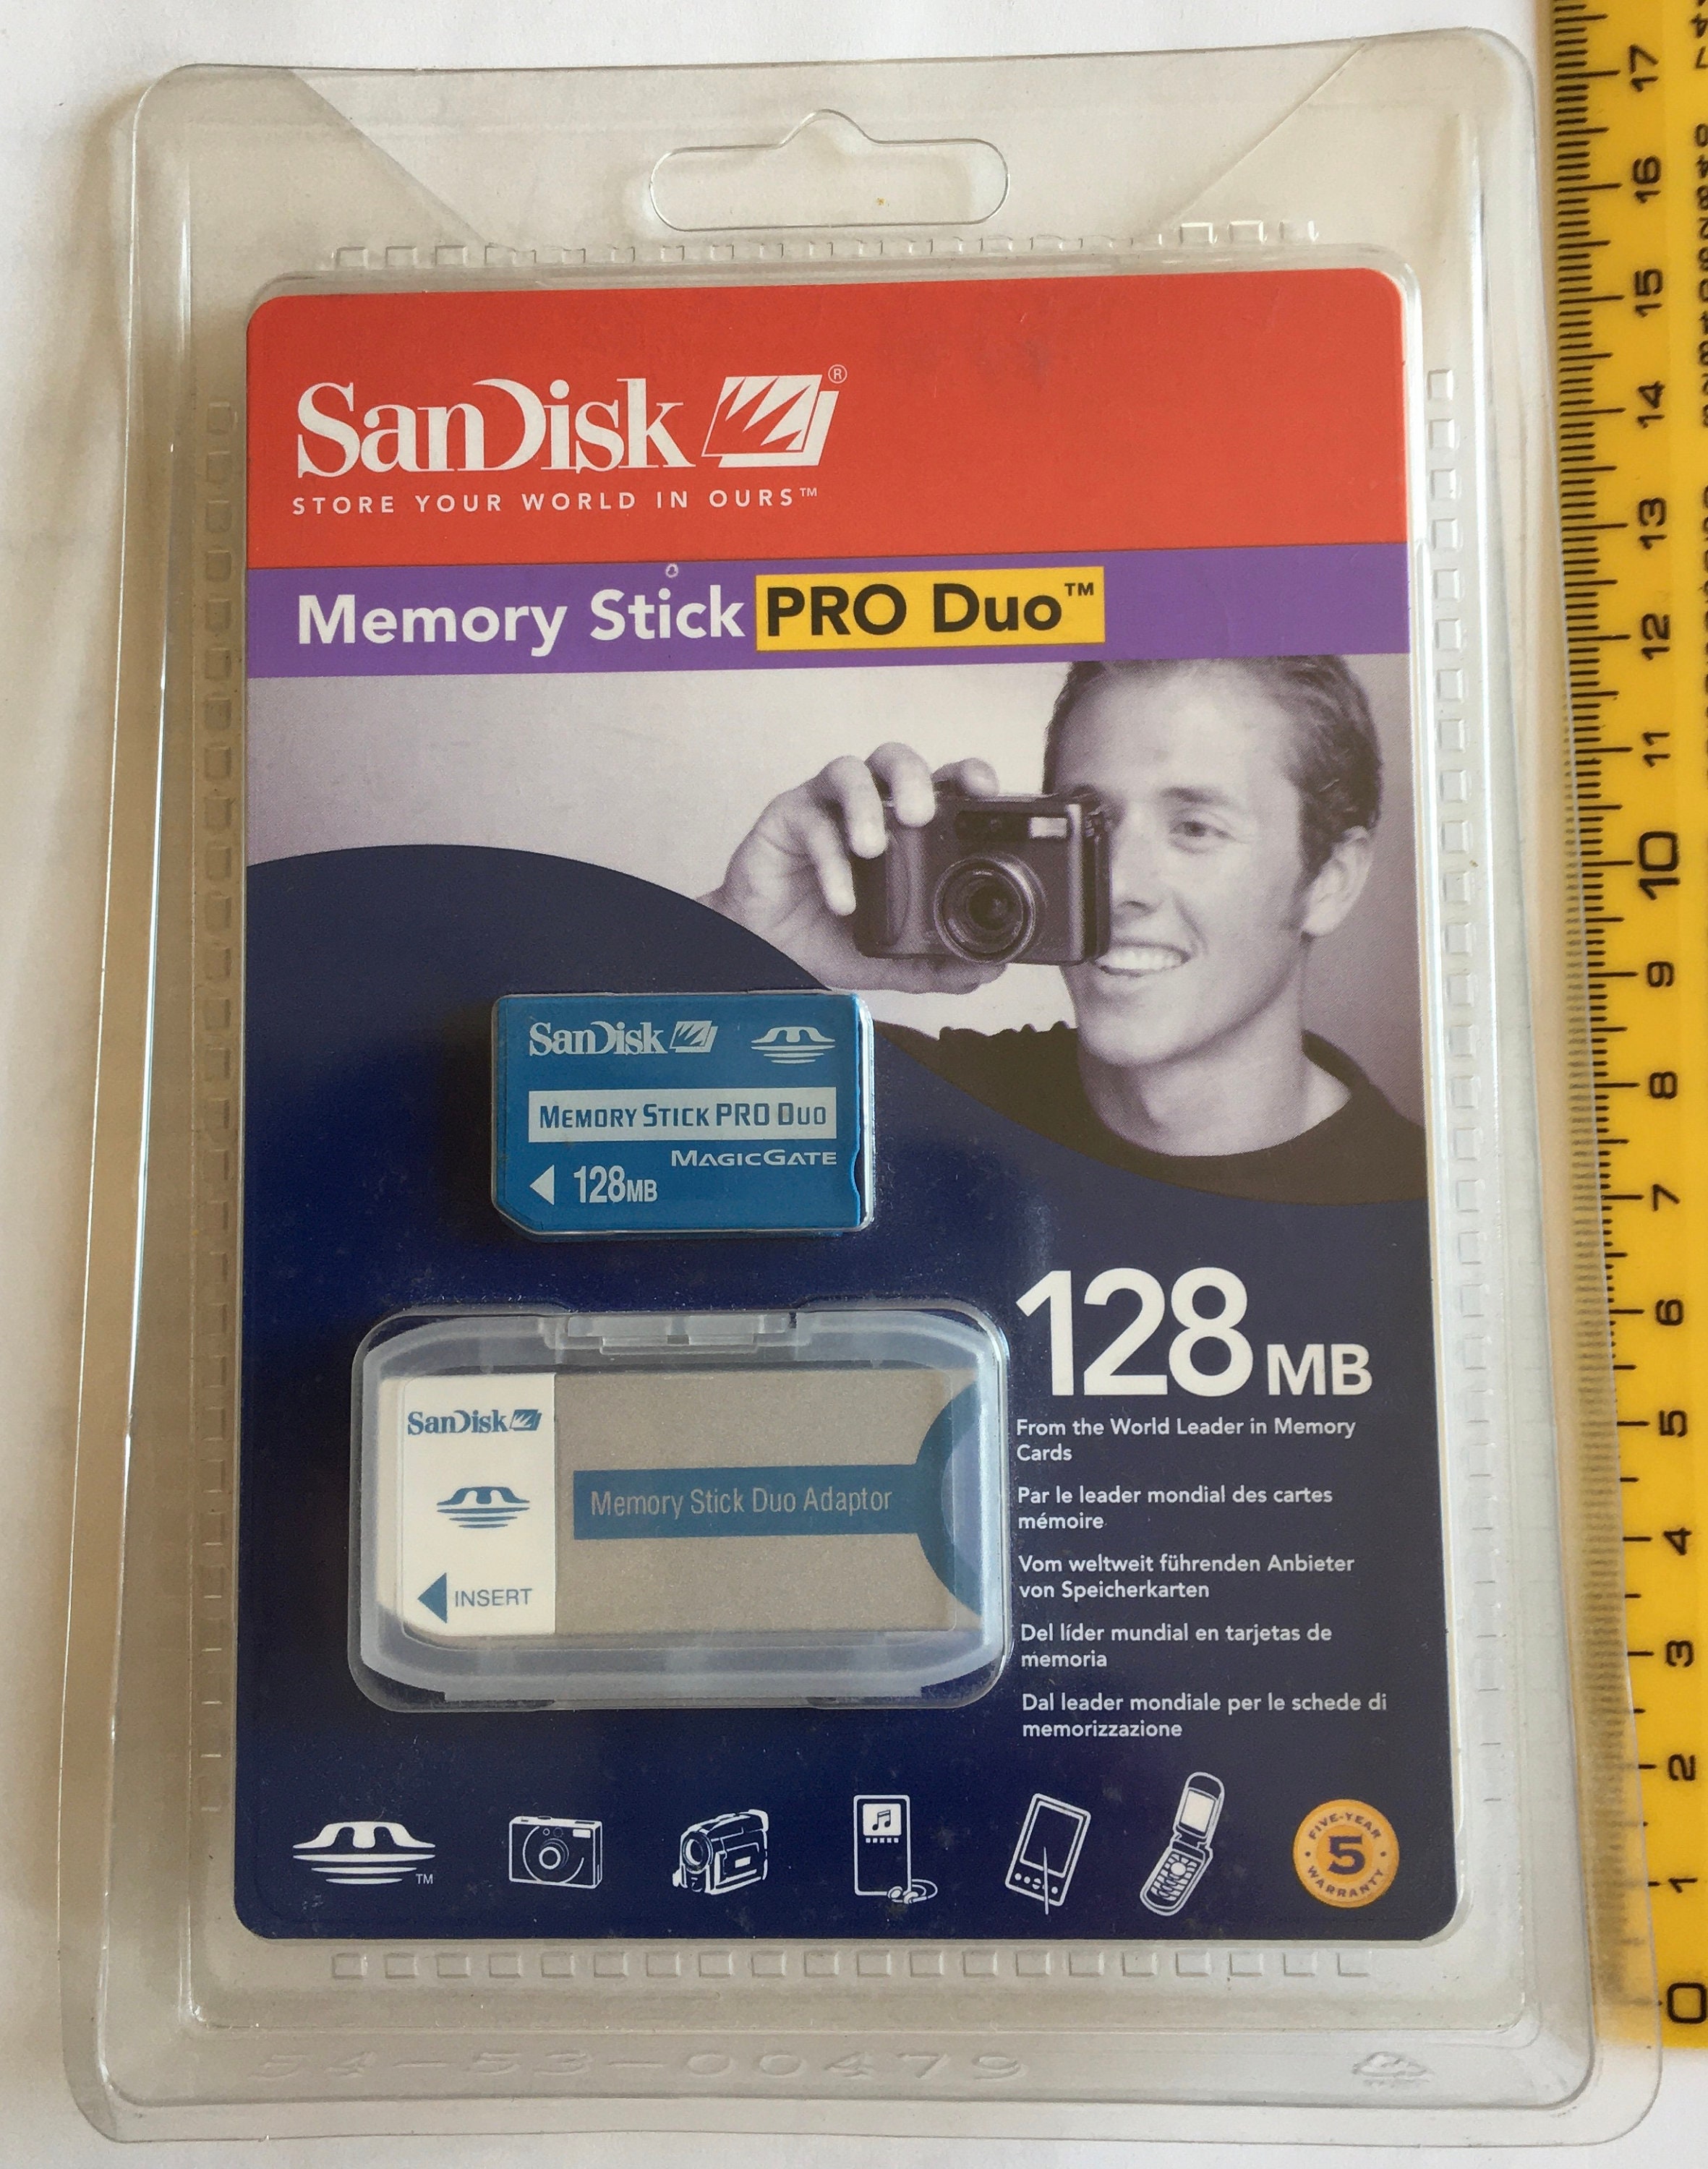 Sony 16MB 32MB 64MB 128MB Memory Stick Duo MSD Memory Card For